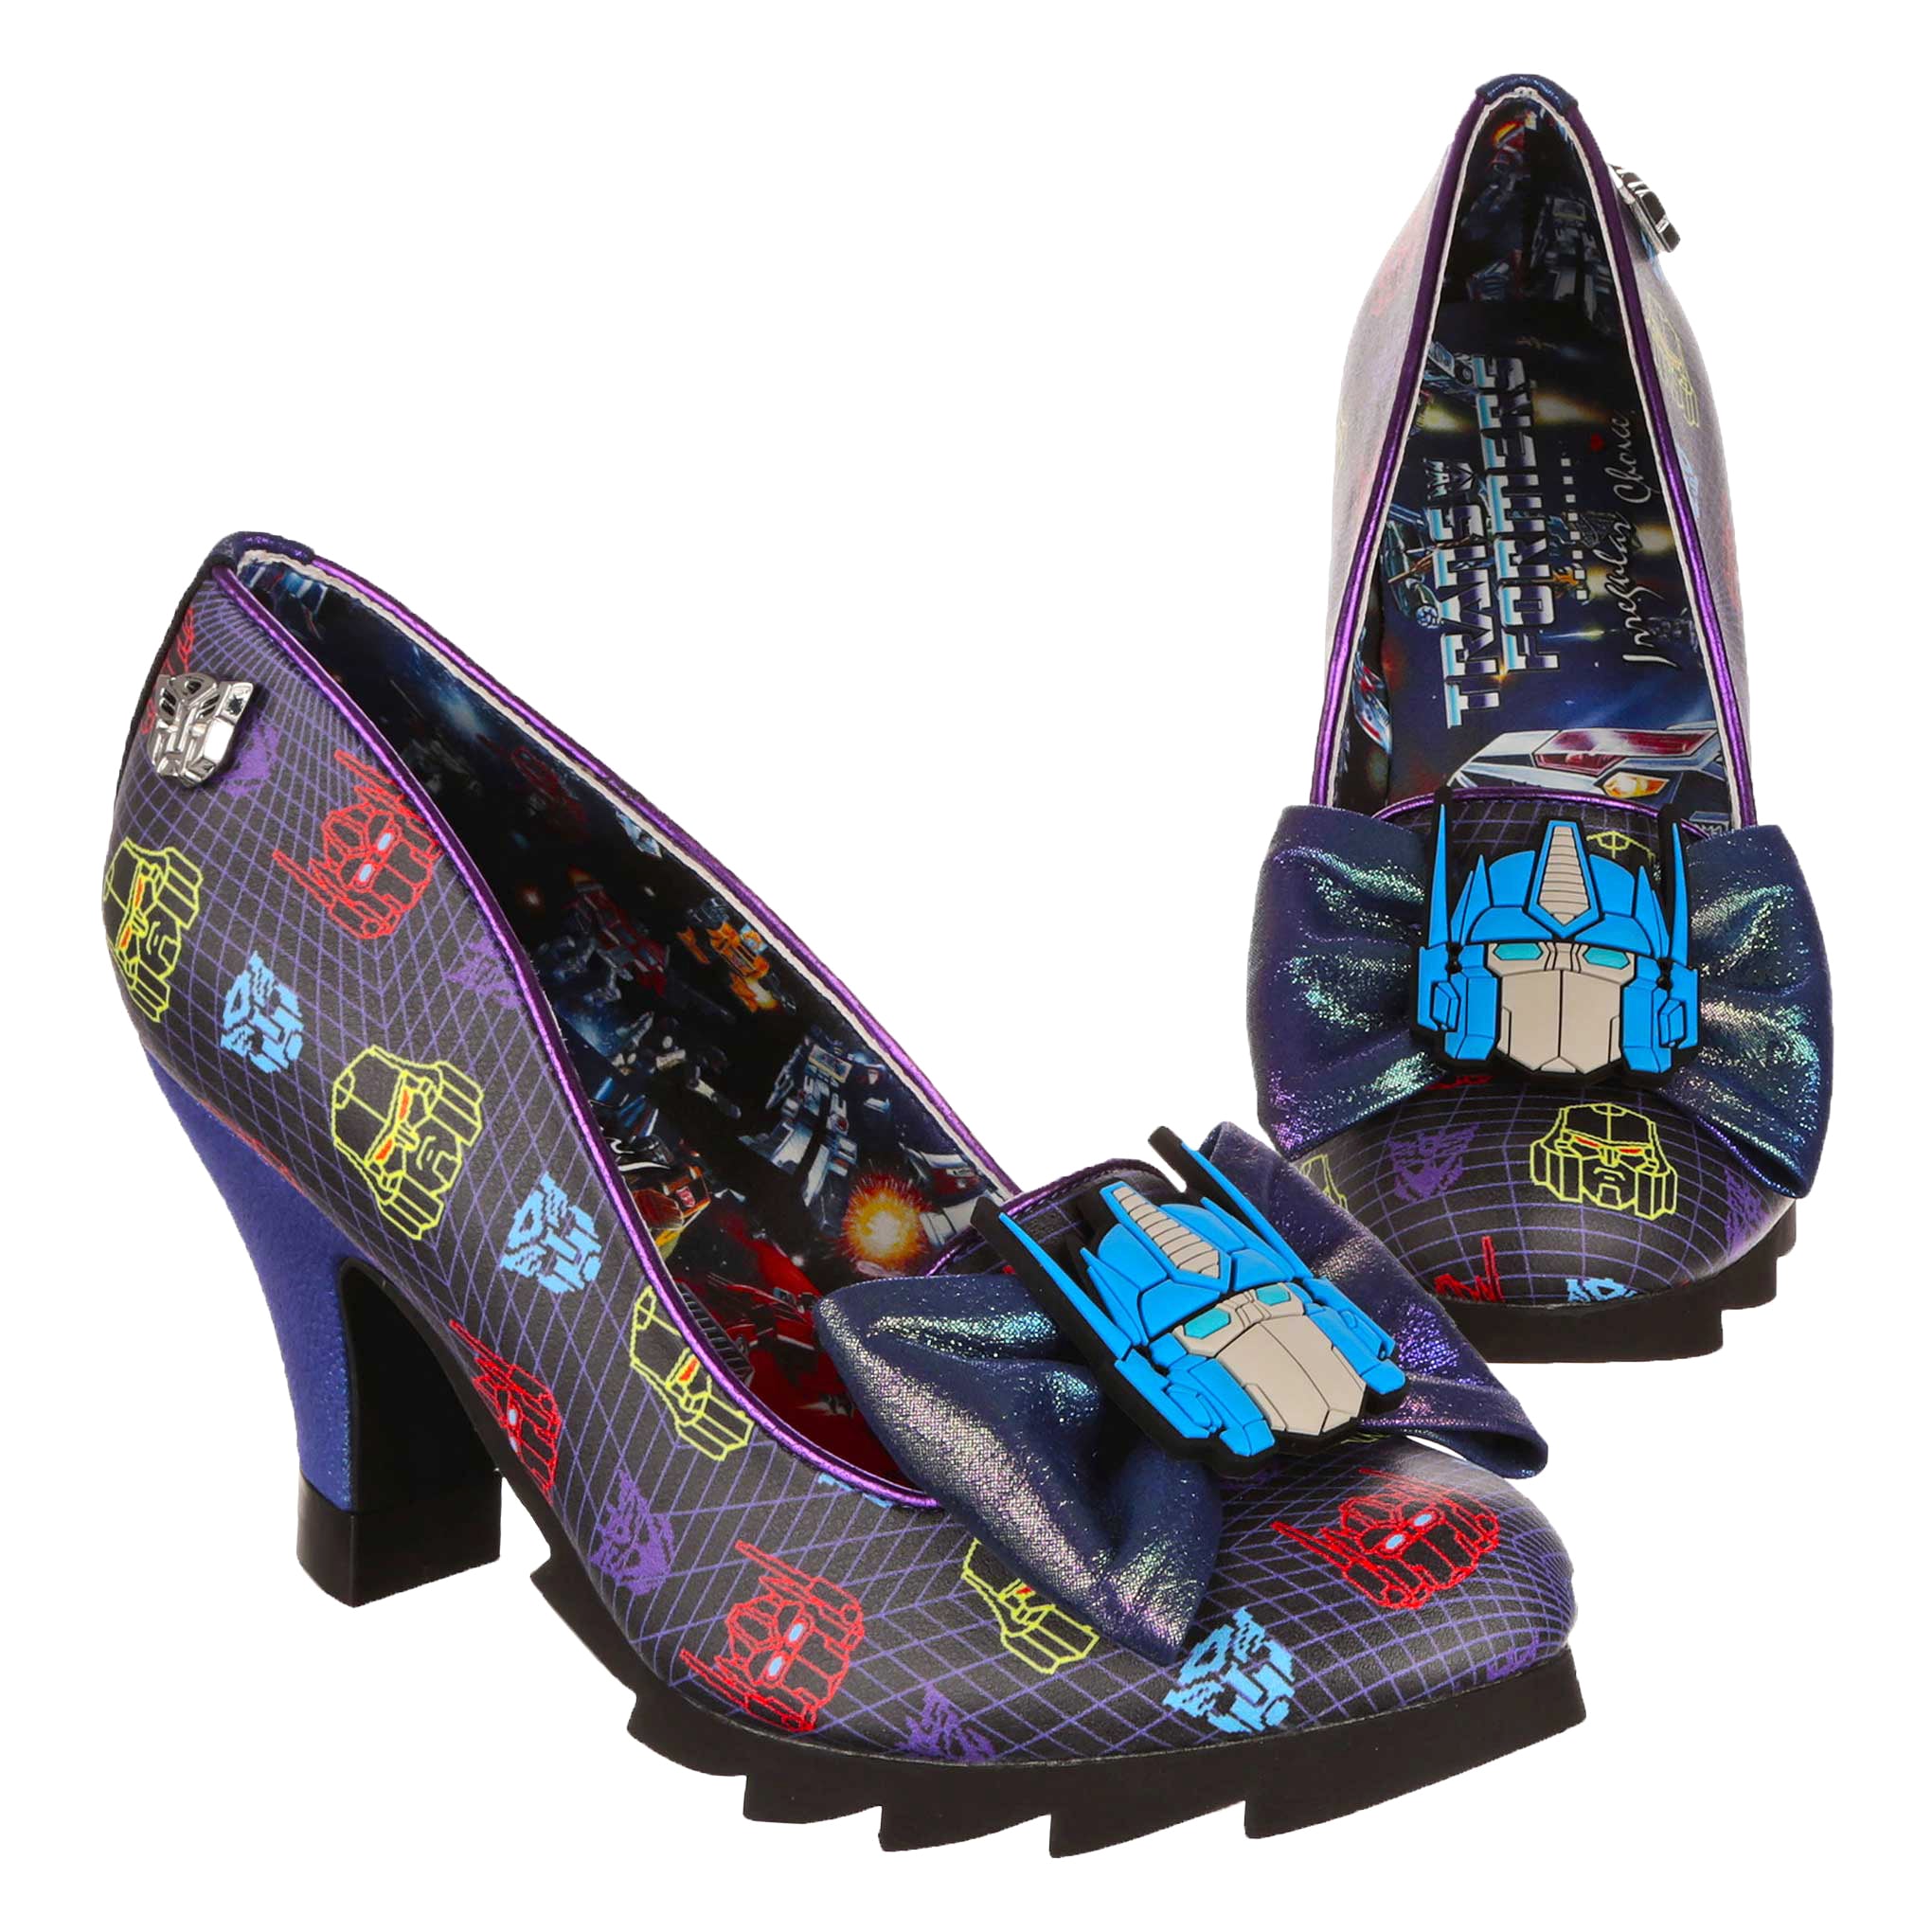 Black and purple Transformers themed high heel shoes with black chunky tread soles and a purple metallic rainbow high heel. Optimus Prime sits on the centre of a matching purple metallic bow on the toe of the shoe, whilst Autobot and Decepticon logos make up the geometric print of the shoe. A classic comic strip style print of a Transformers battle scene makes up the lining of the shoe with a Transformers X Irregular Choice logo.